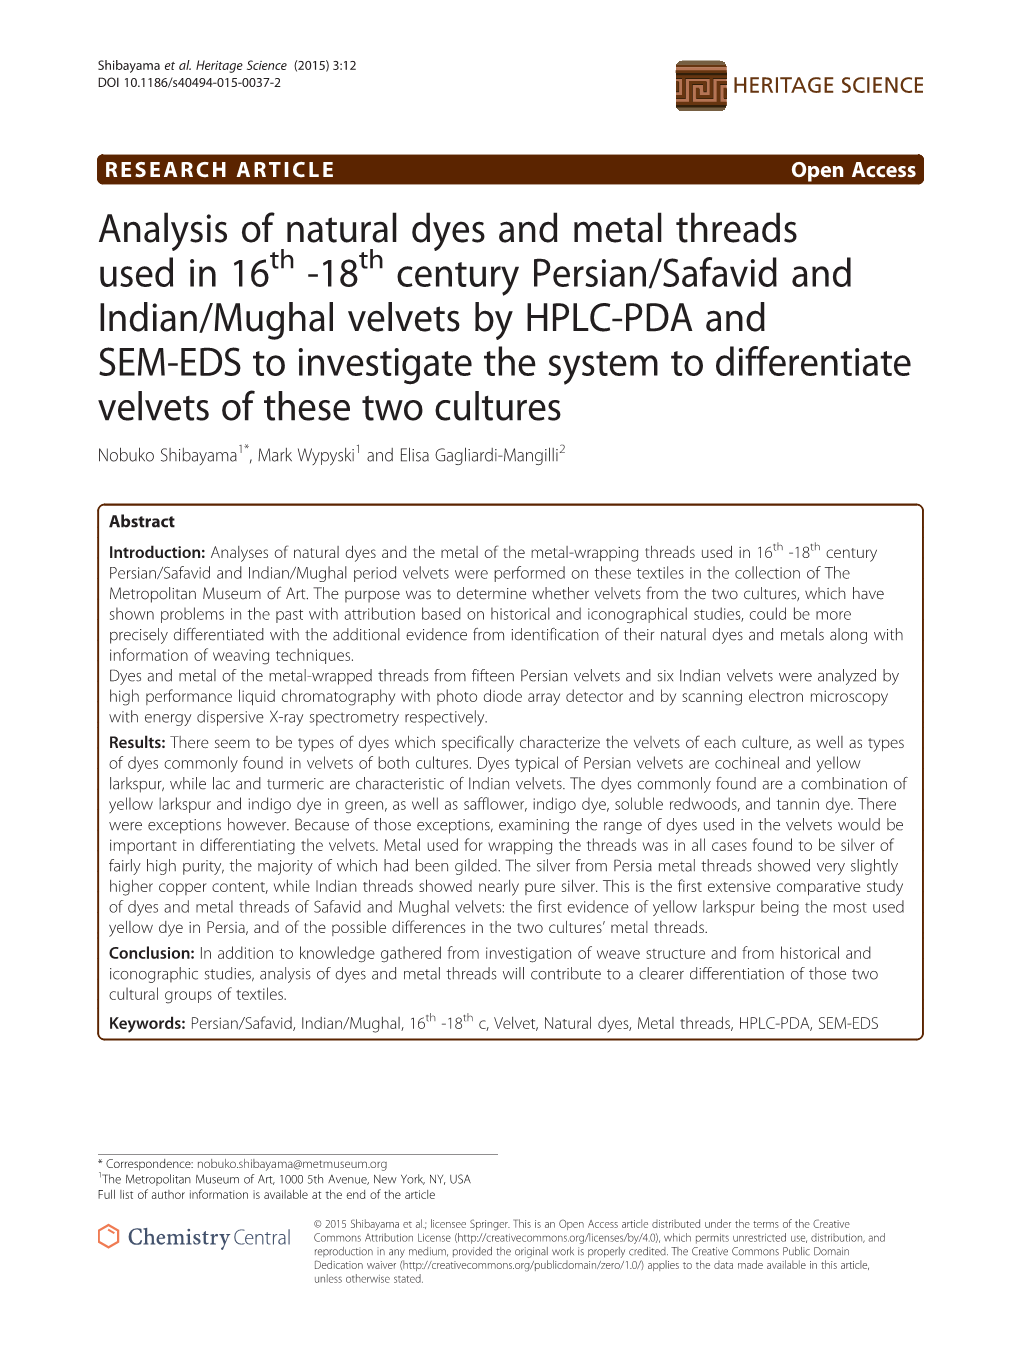 Analysis of Natural Dyes and Metal Threads Used in 16Th